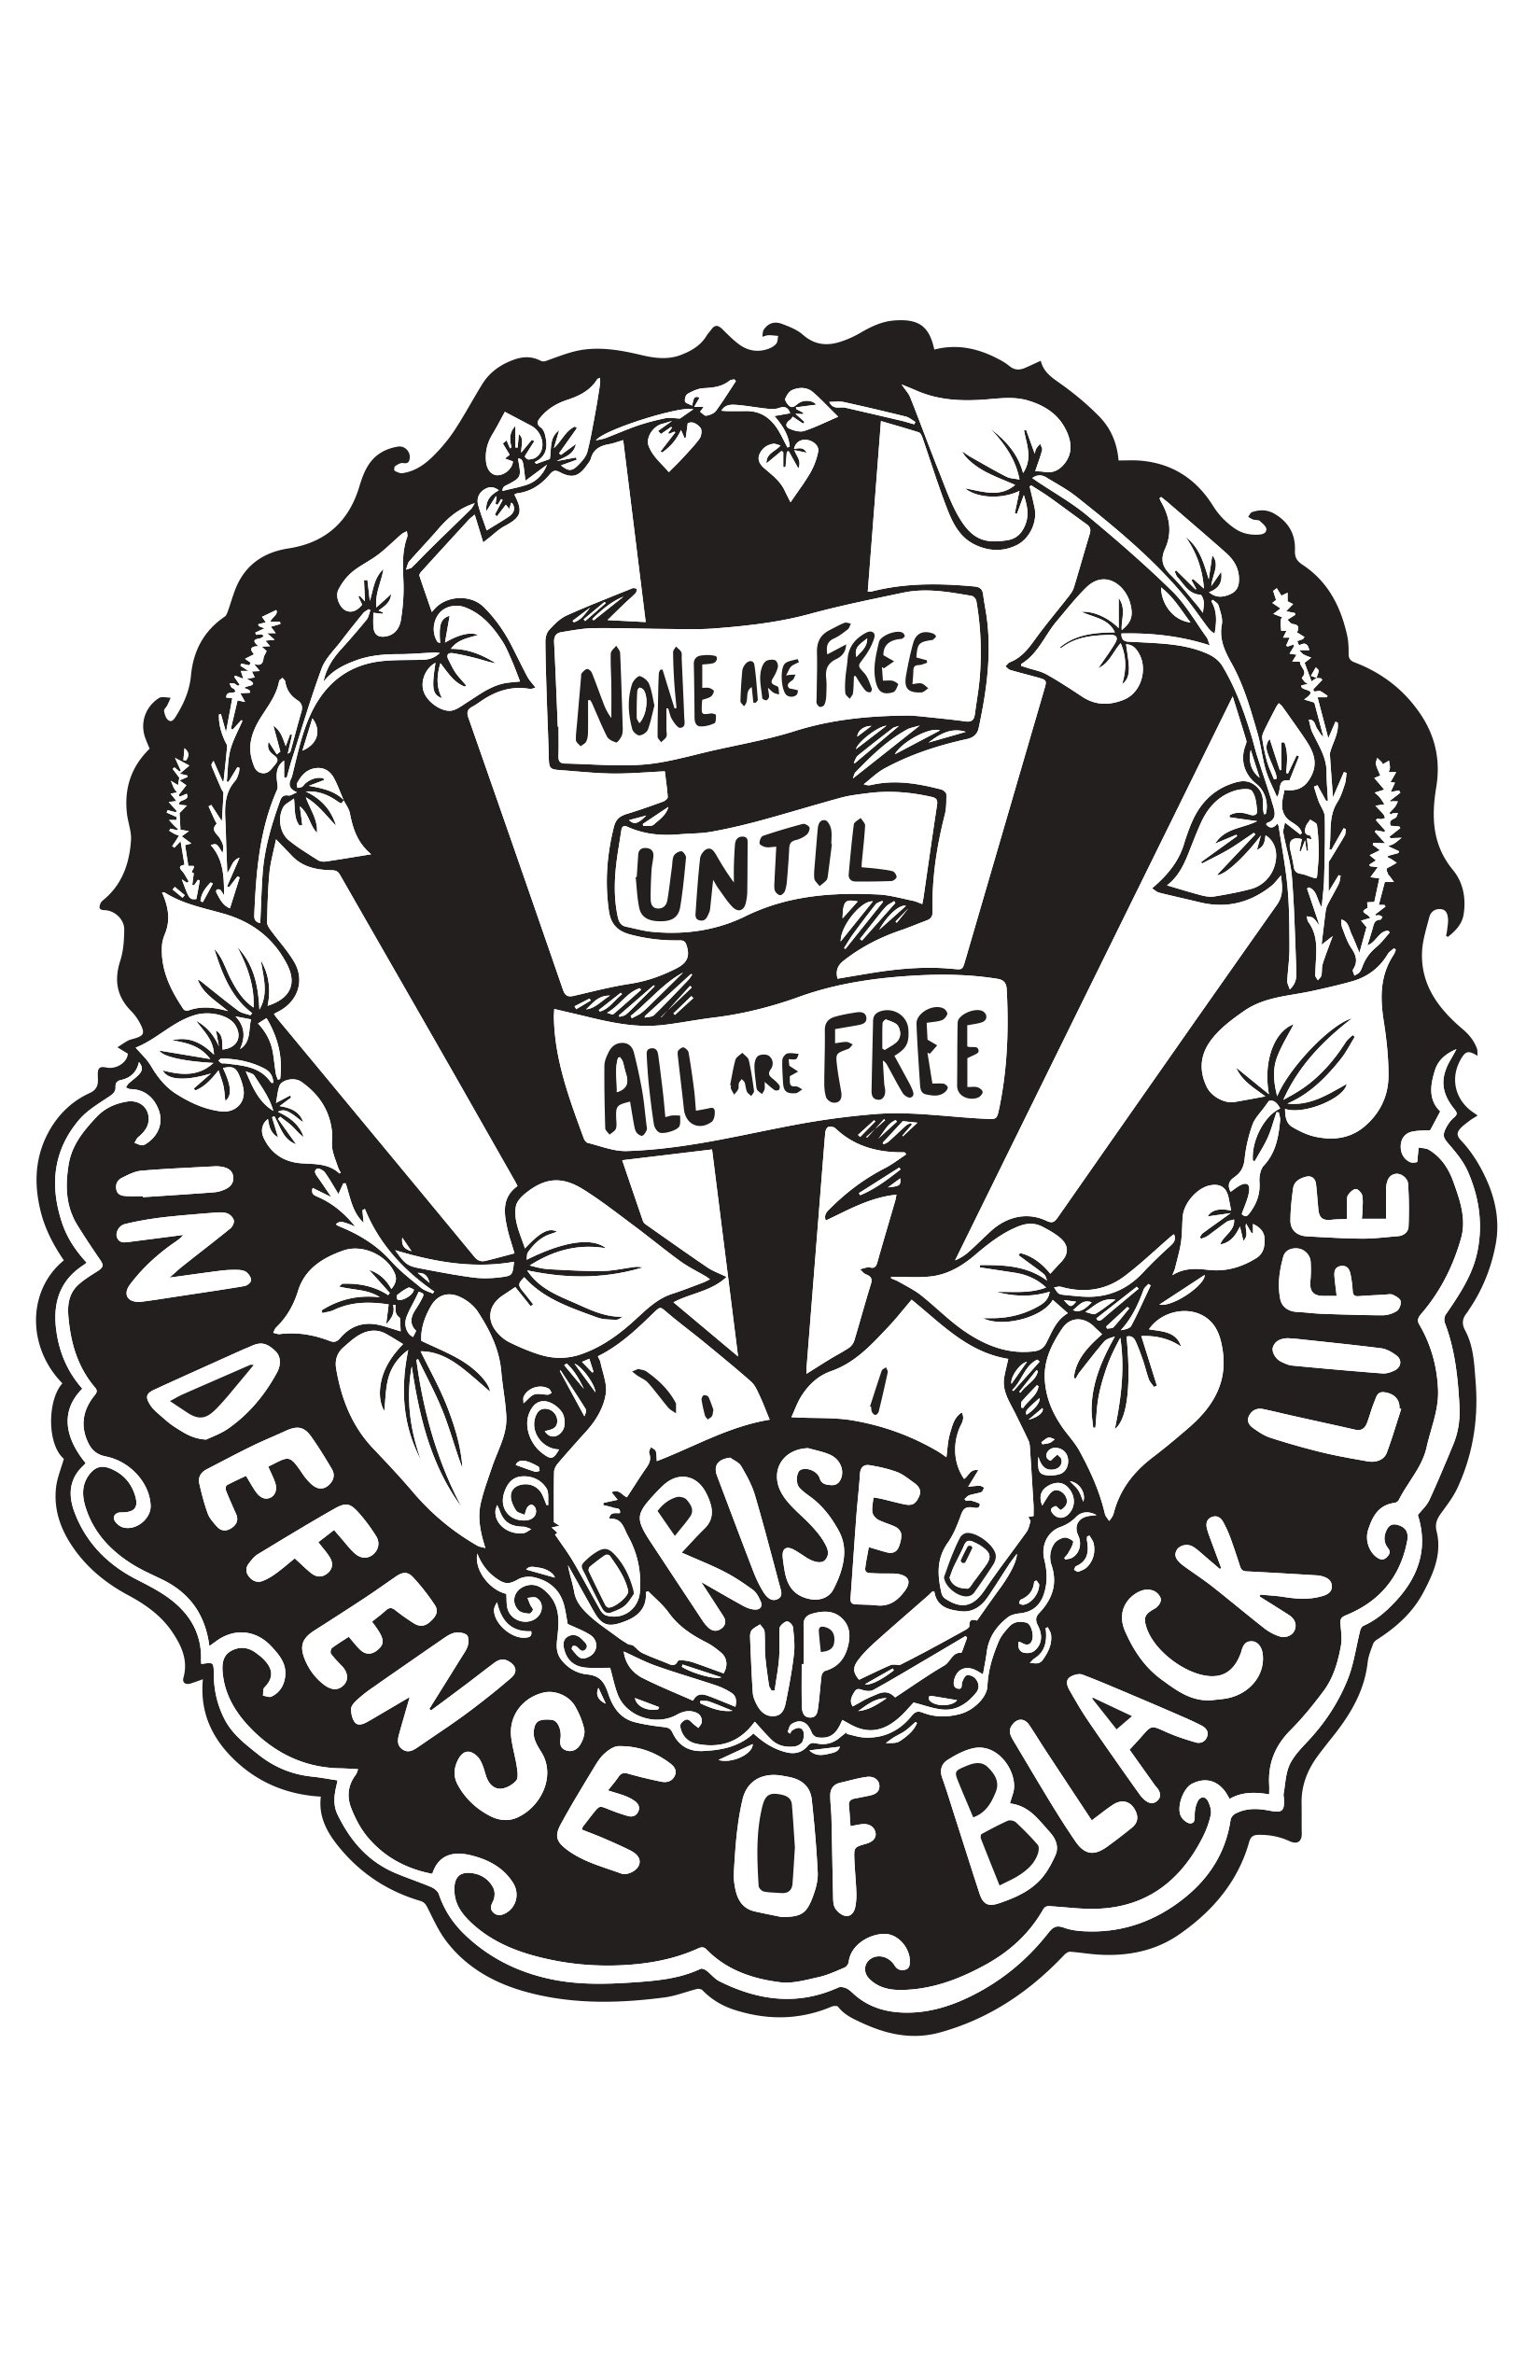 BLM_RISE_UP_page-0001.jpg